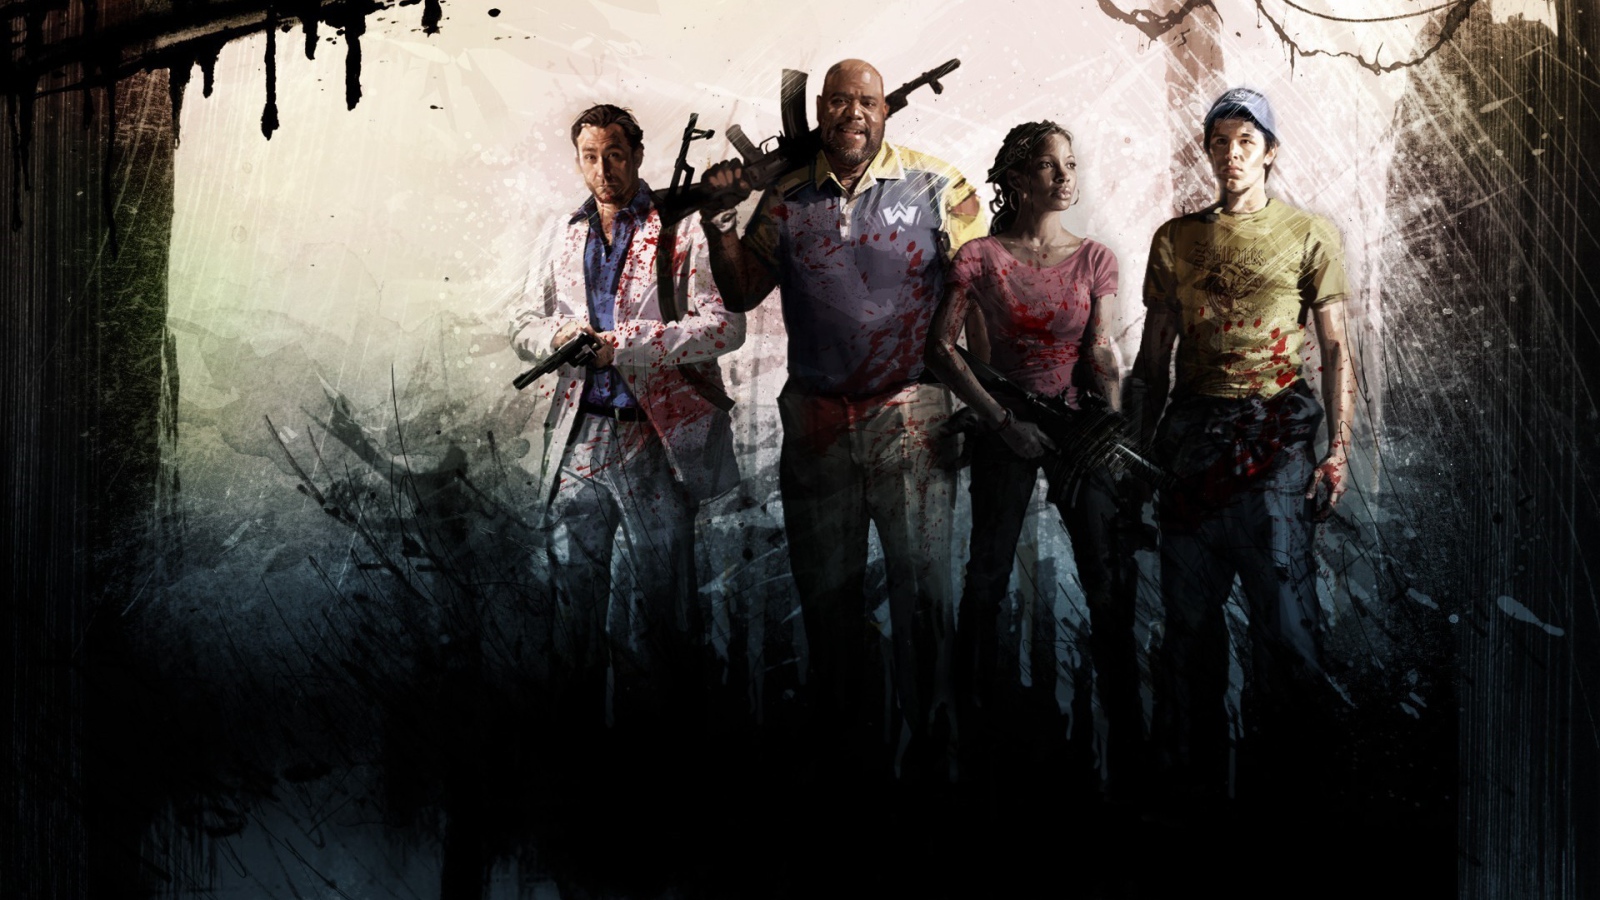 Heroes of the game Left 4 Dead 2